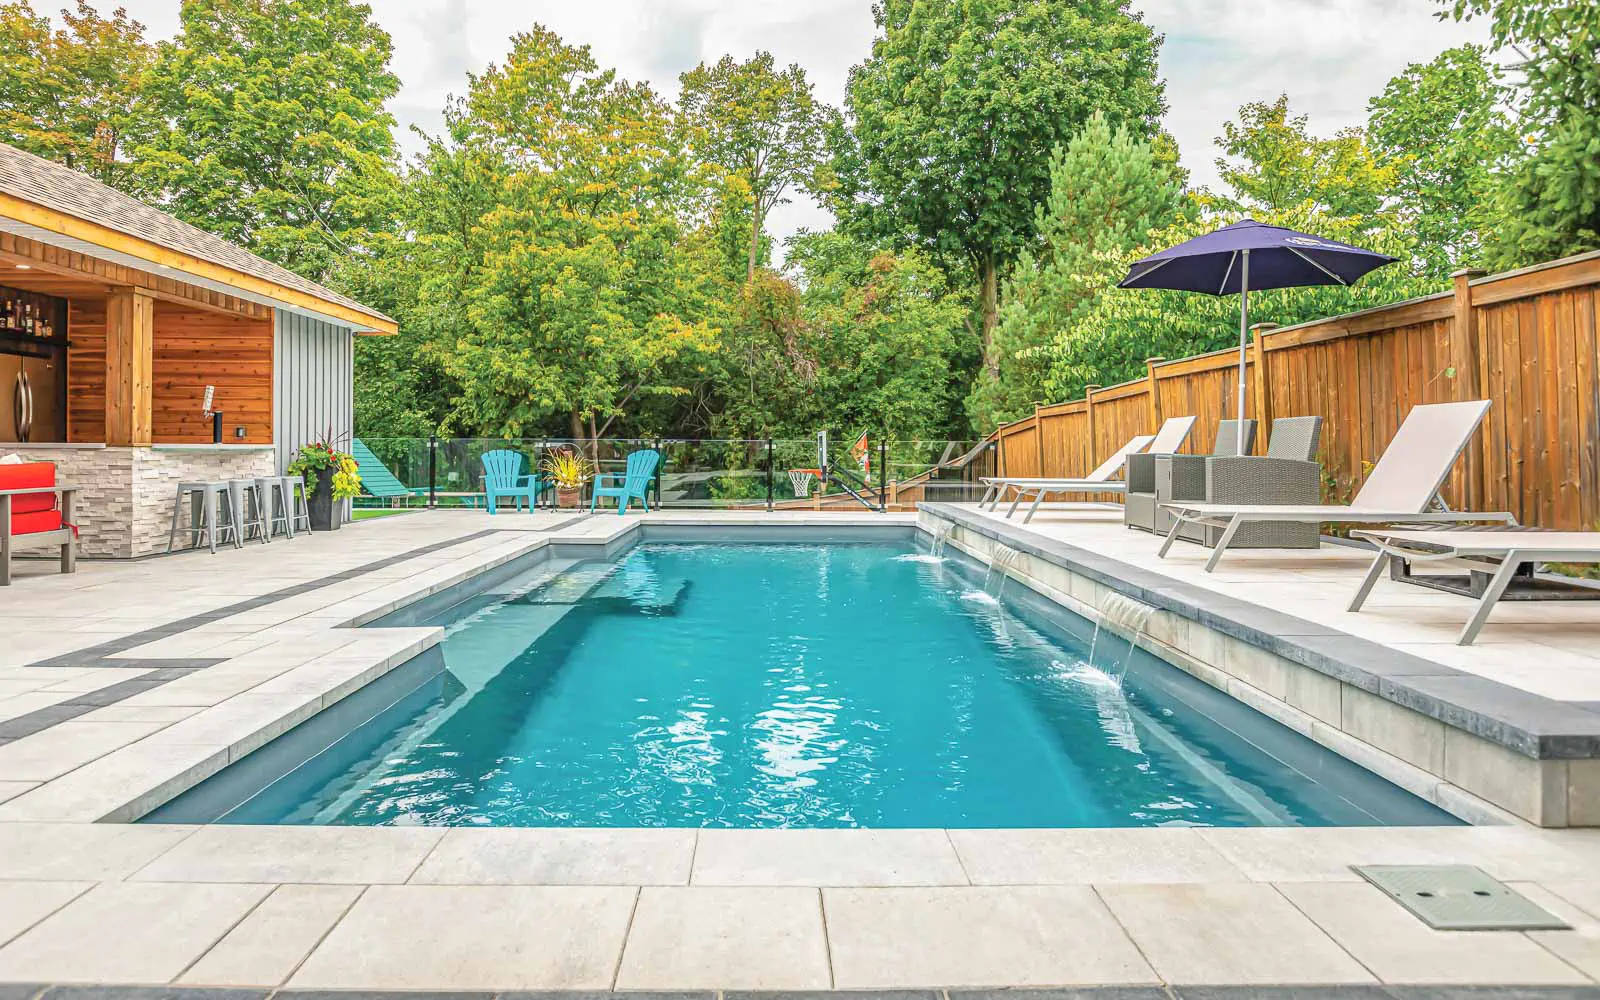 The Elegance, a fiberglass pool design manufactured by Leisure Pools